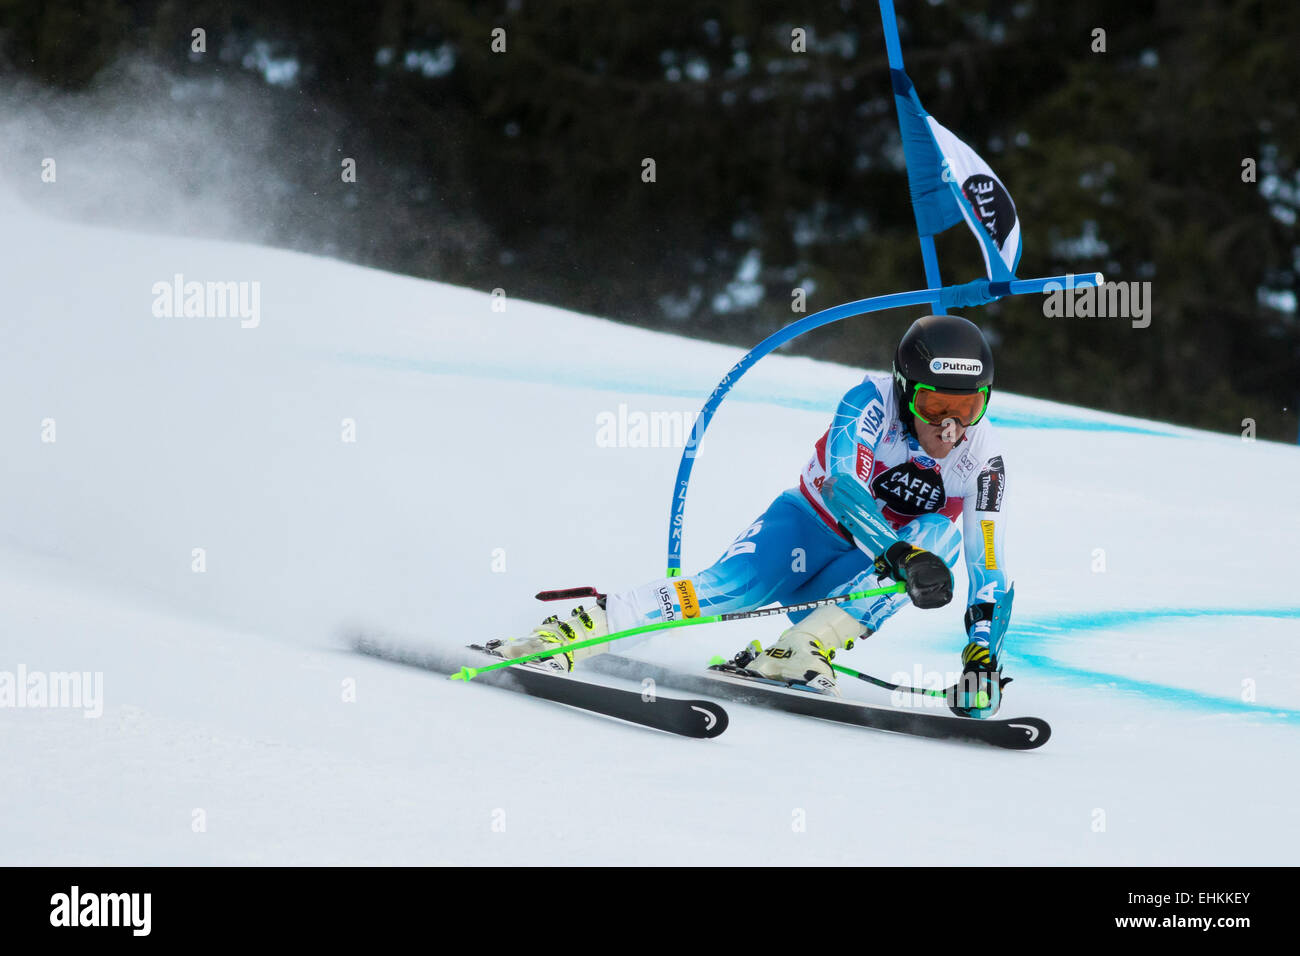 Val Badia, Italy 21 December 2014. LIGETY Ted (Usa) competing in the Audi Fis Alpine Skiing World Cup Men’s Giant Slalom Stock Photo